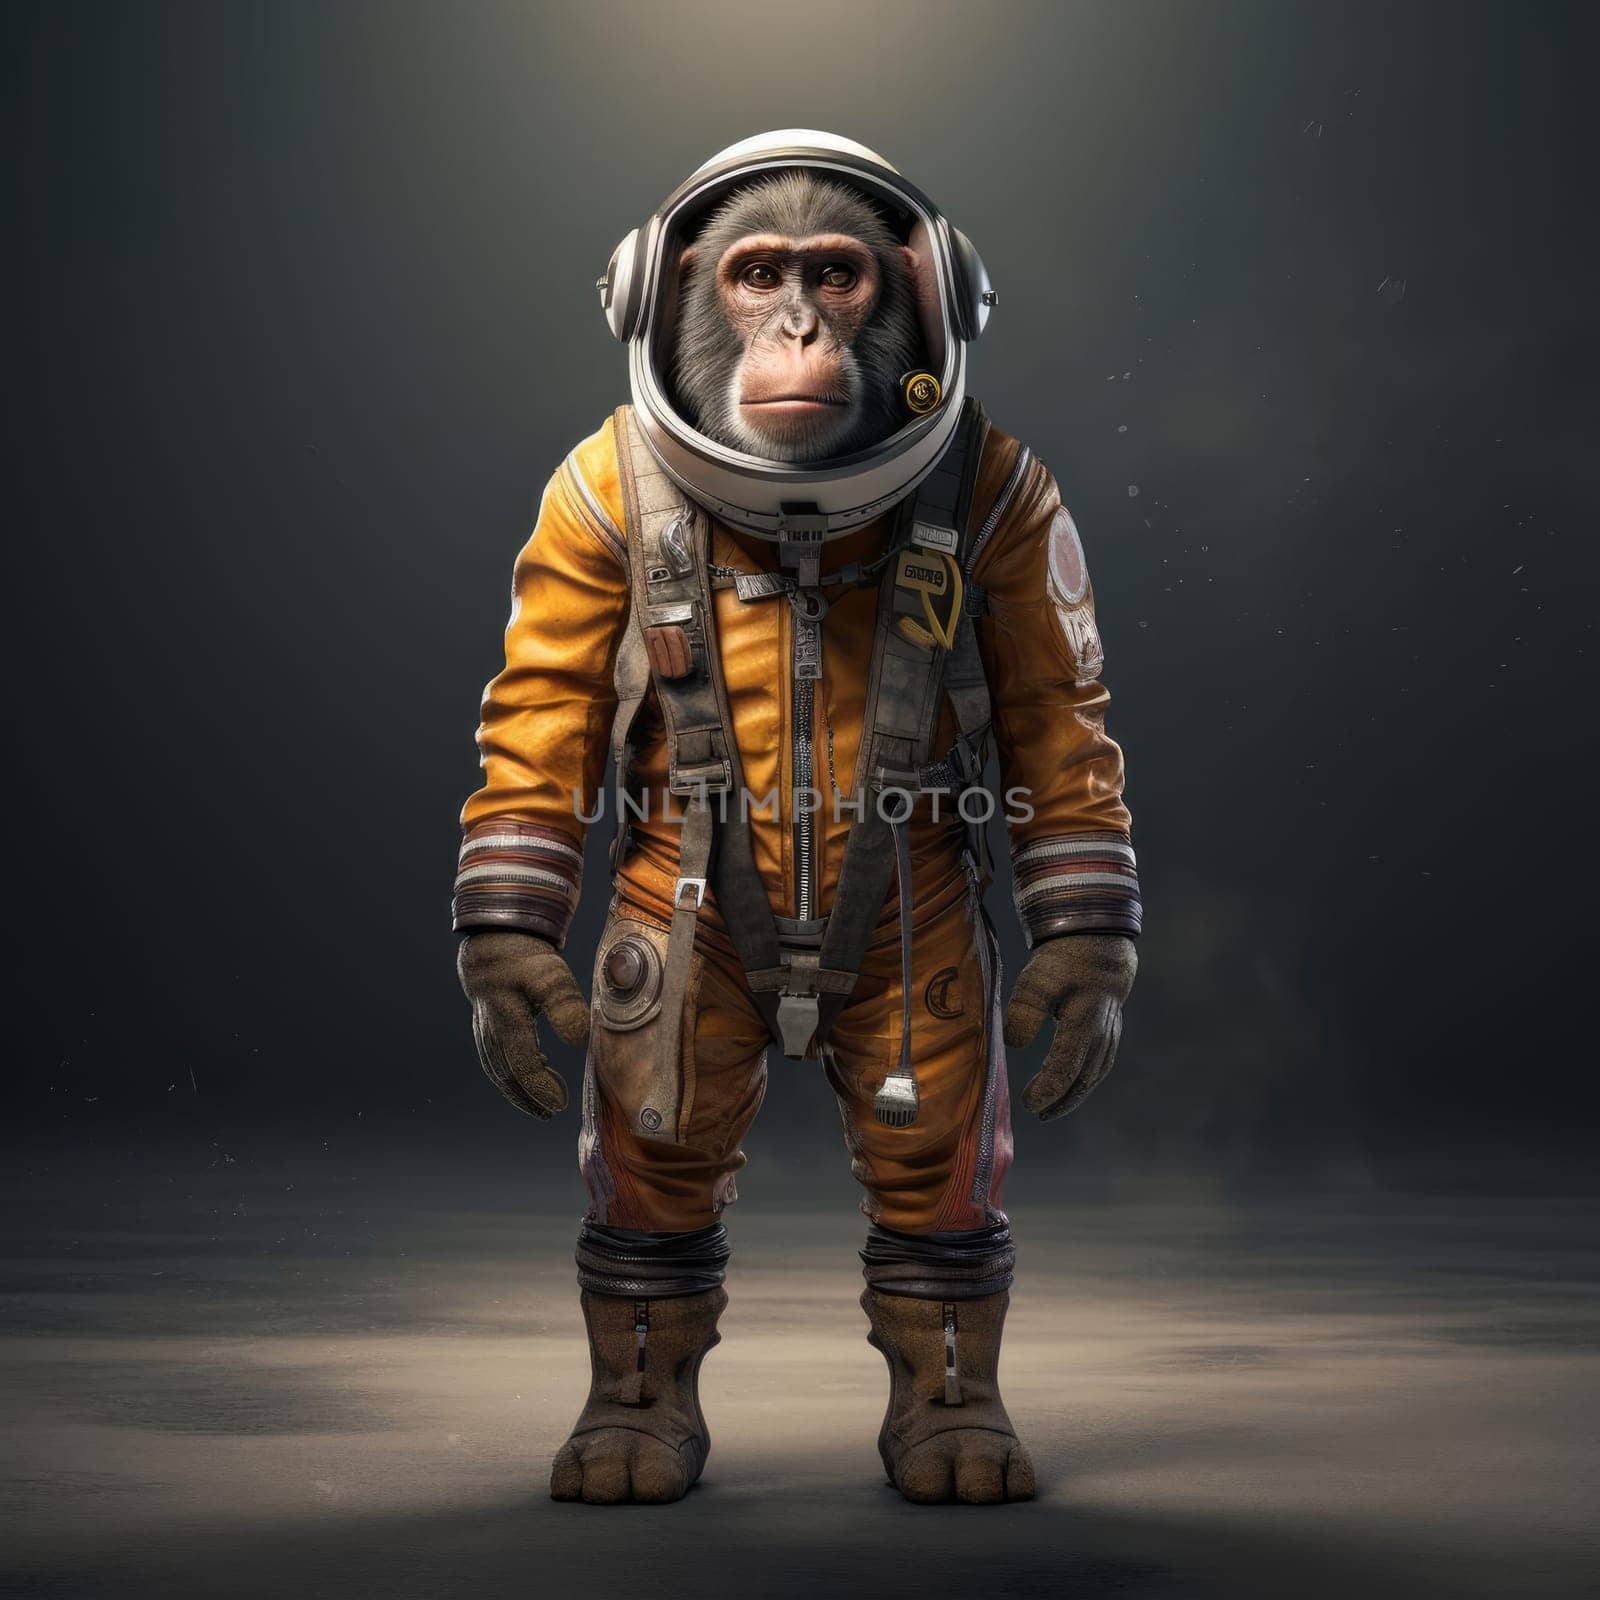 Monkey in space suit in space. Animal life